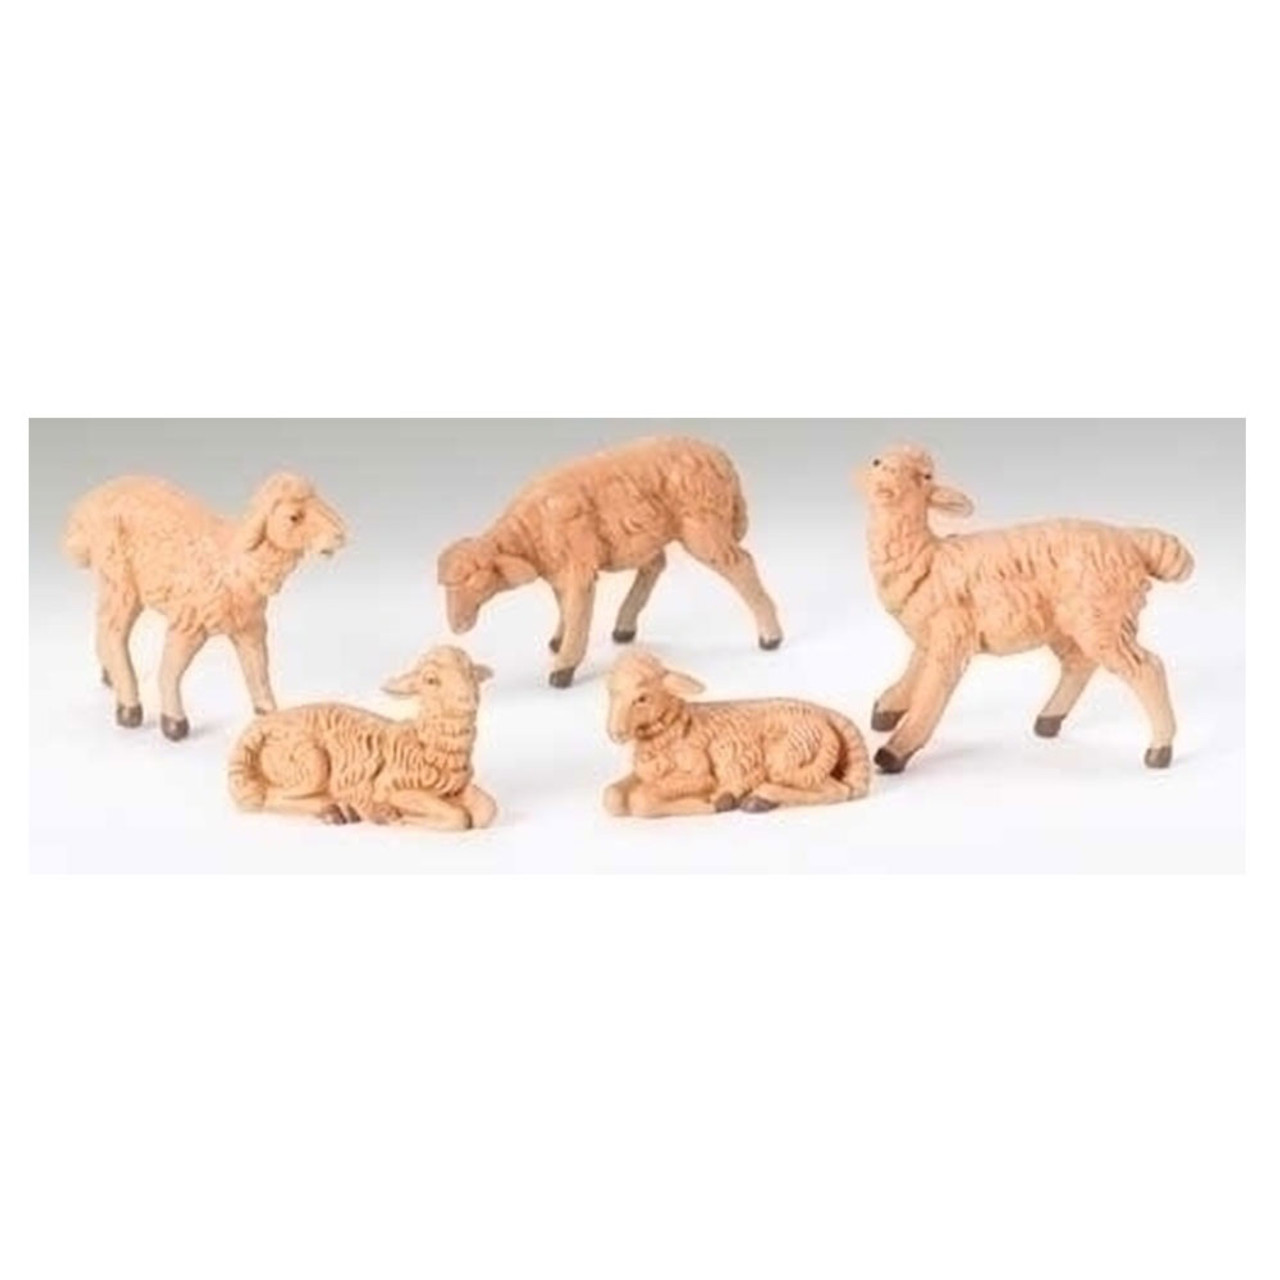 5 Piece Set of Brown Sheep for 5" Scale Nativity Set made by Fontanini